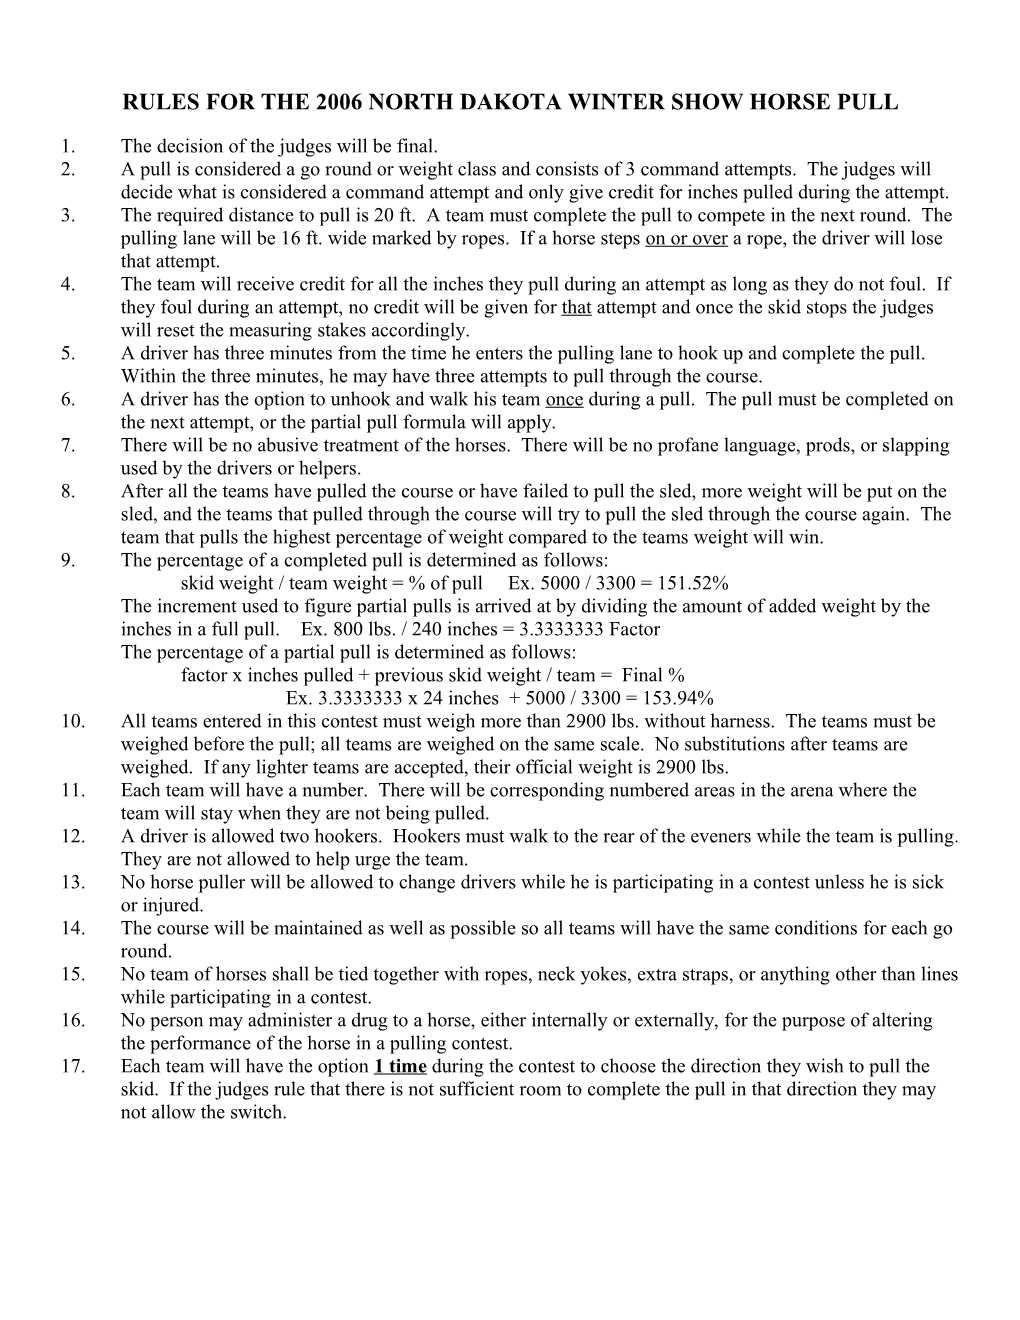 Rules for the 2003 North Dakota Winter Show Horse Pull